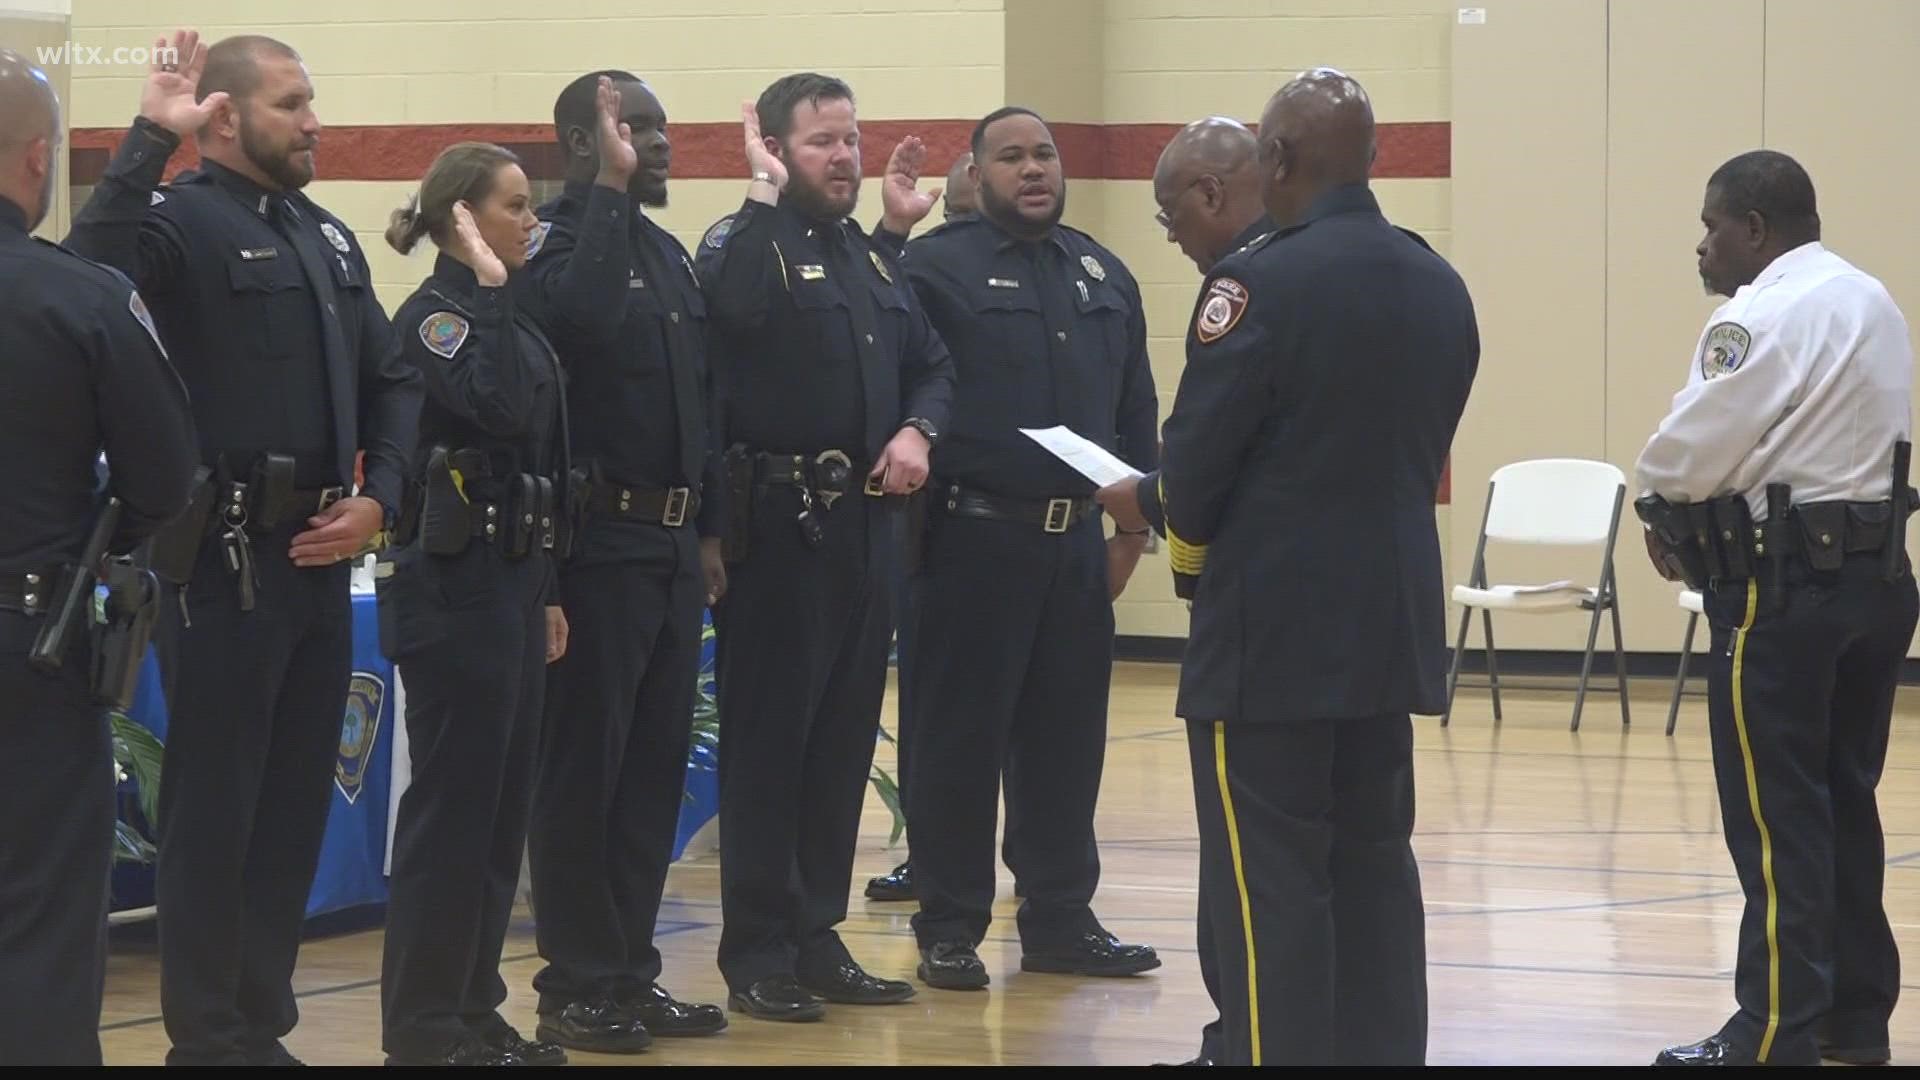 Officers with the Orangeburg Department of Public Safety are recommitting themselves to the community by taking the pledge to be peace officers.